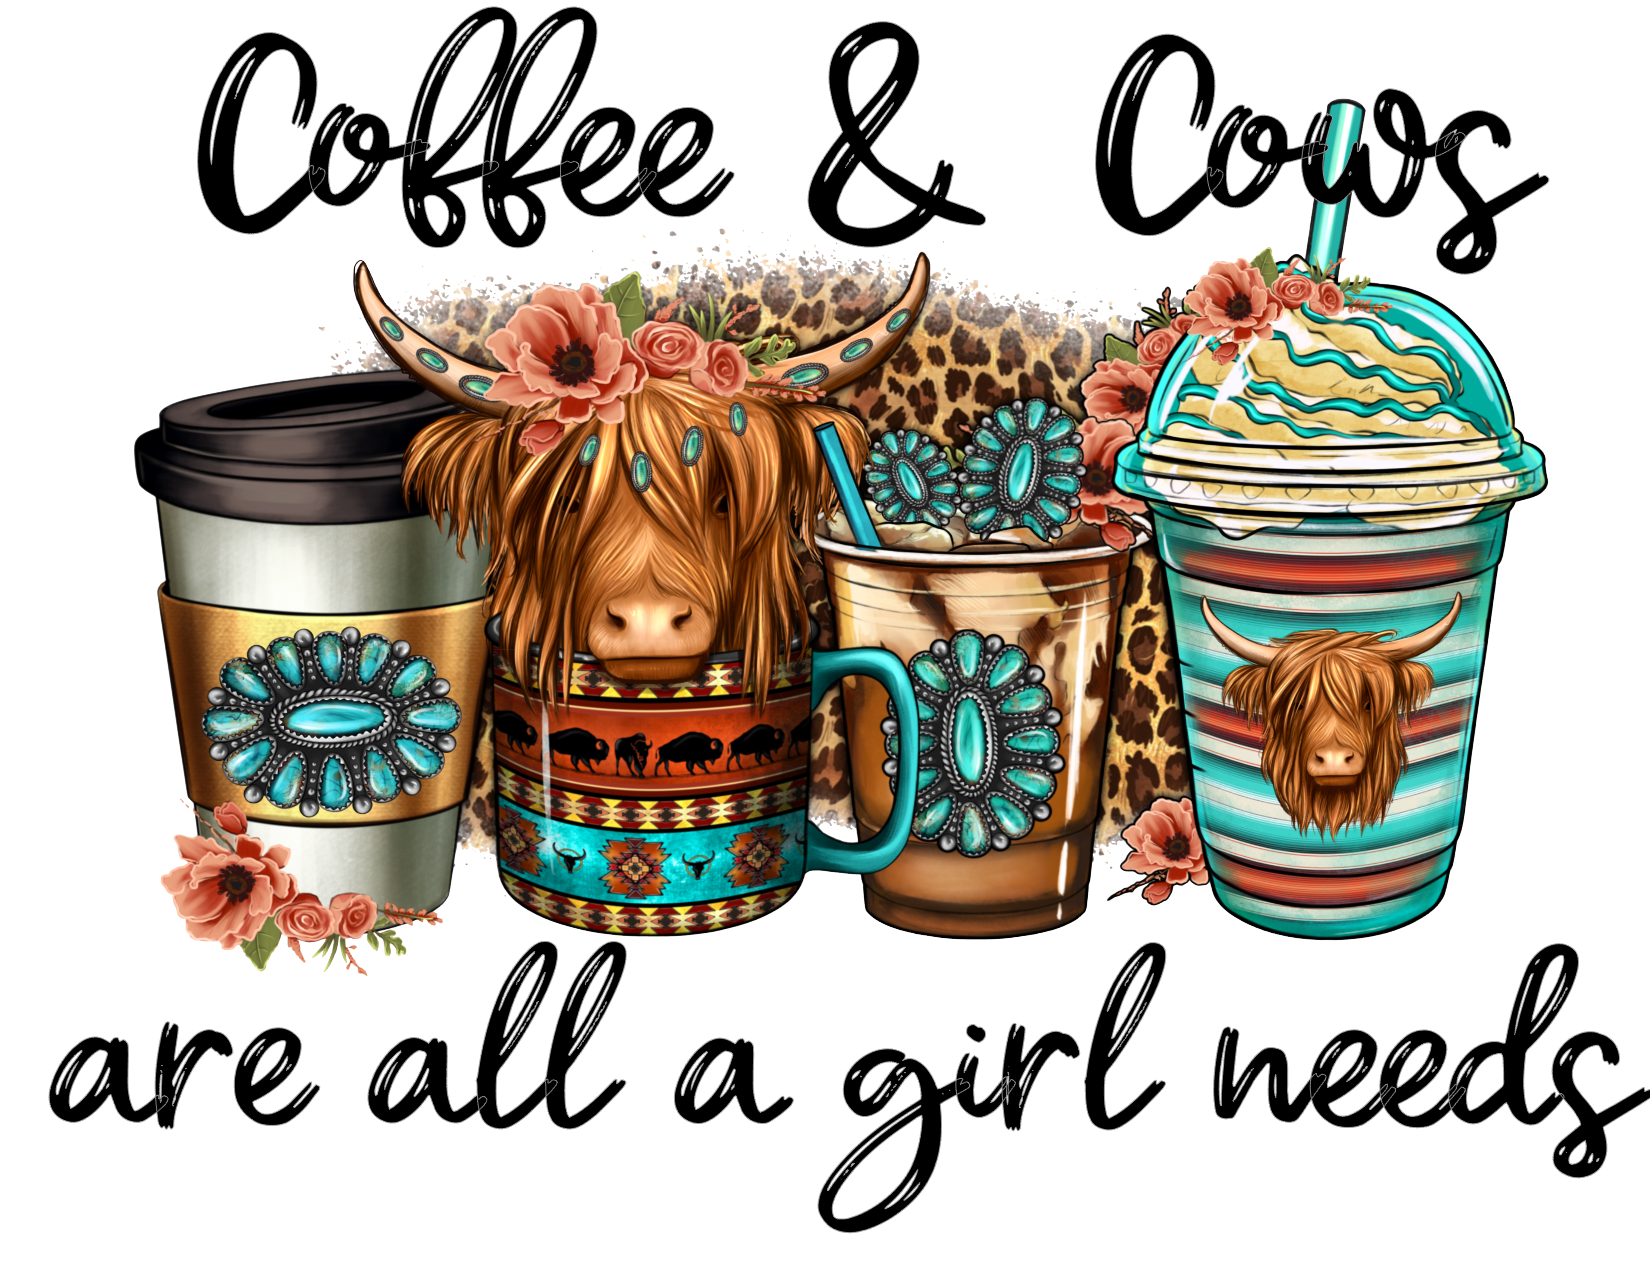 #226 Coffee & Cows are all a girl needs